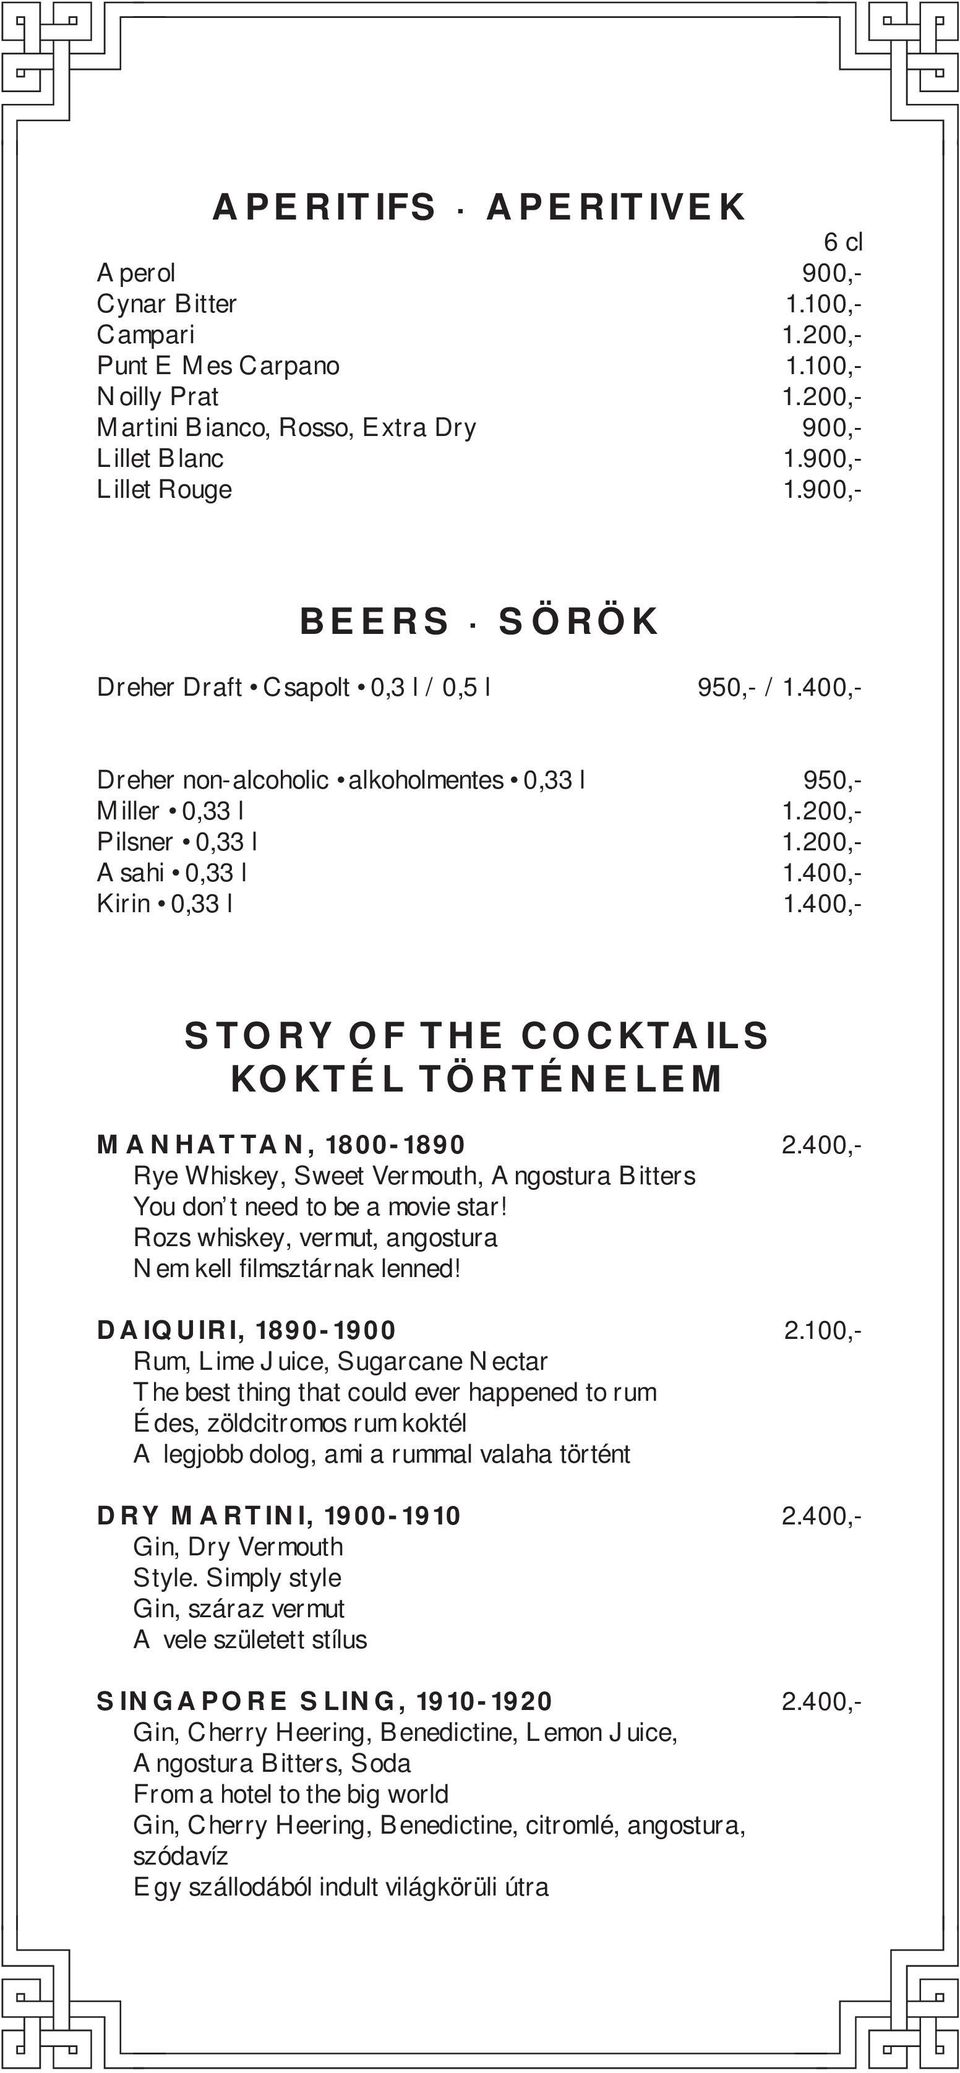 400,- STORY OF THE COCKTAILS KOKTÉL TÖRTÉNELEM MANHATTAN, 1800-1890 2.400,- Rye Whiskey, Sweet Vermouth, Angostura Bitters You don t need to be a movie star!